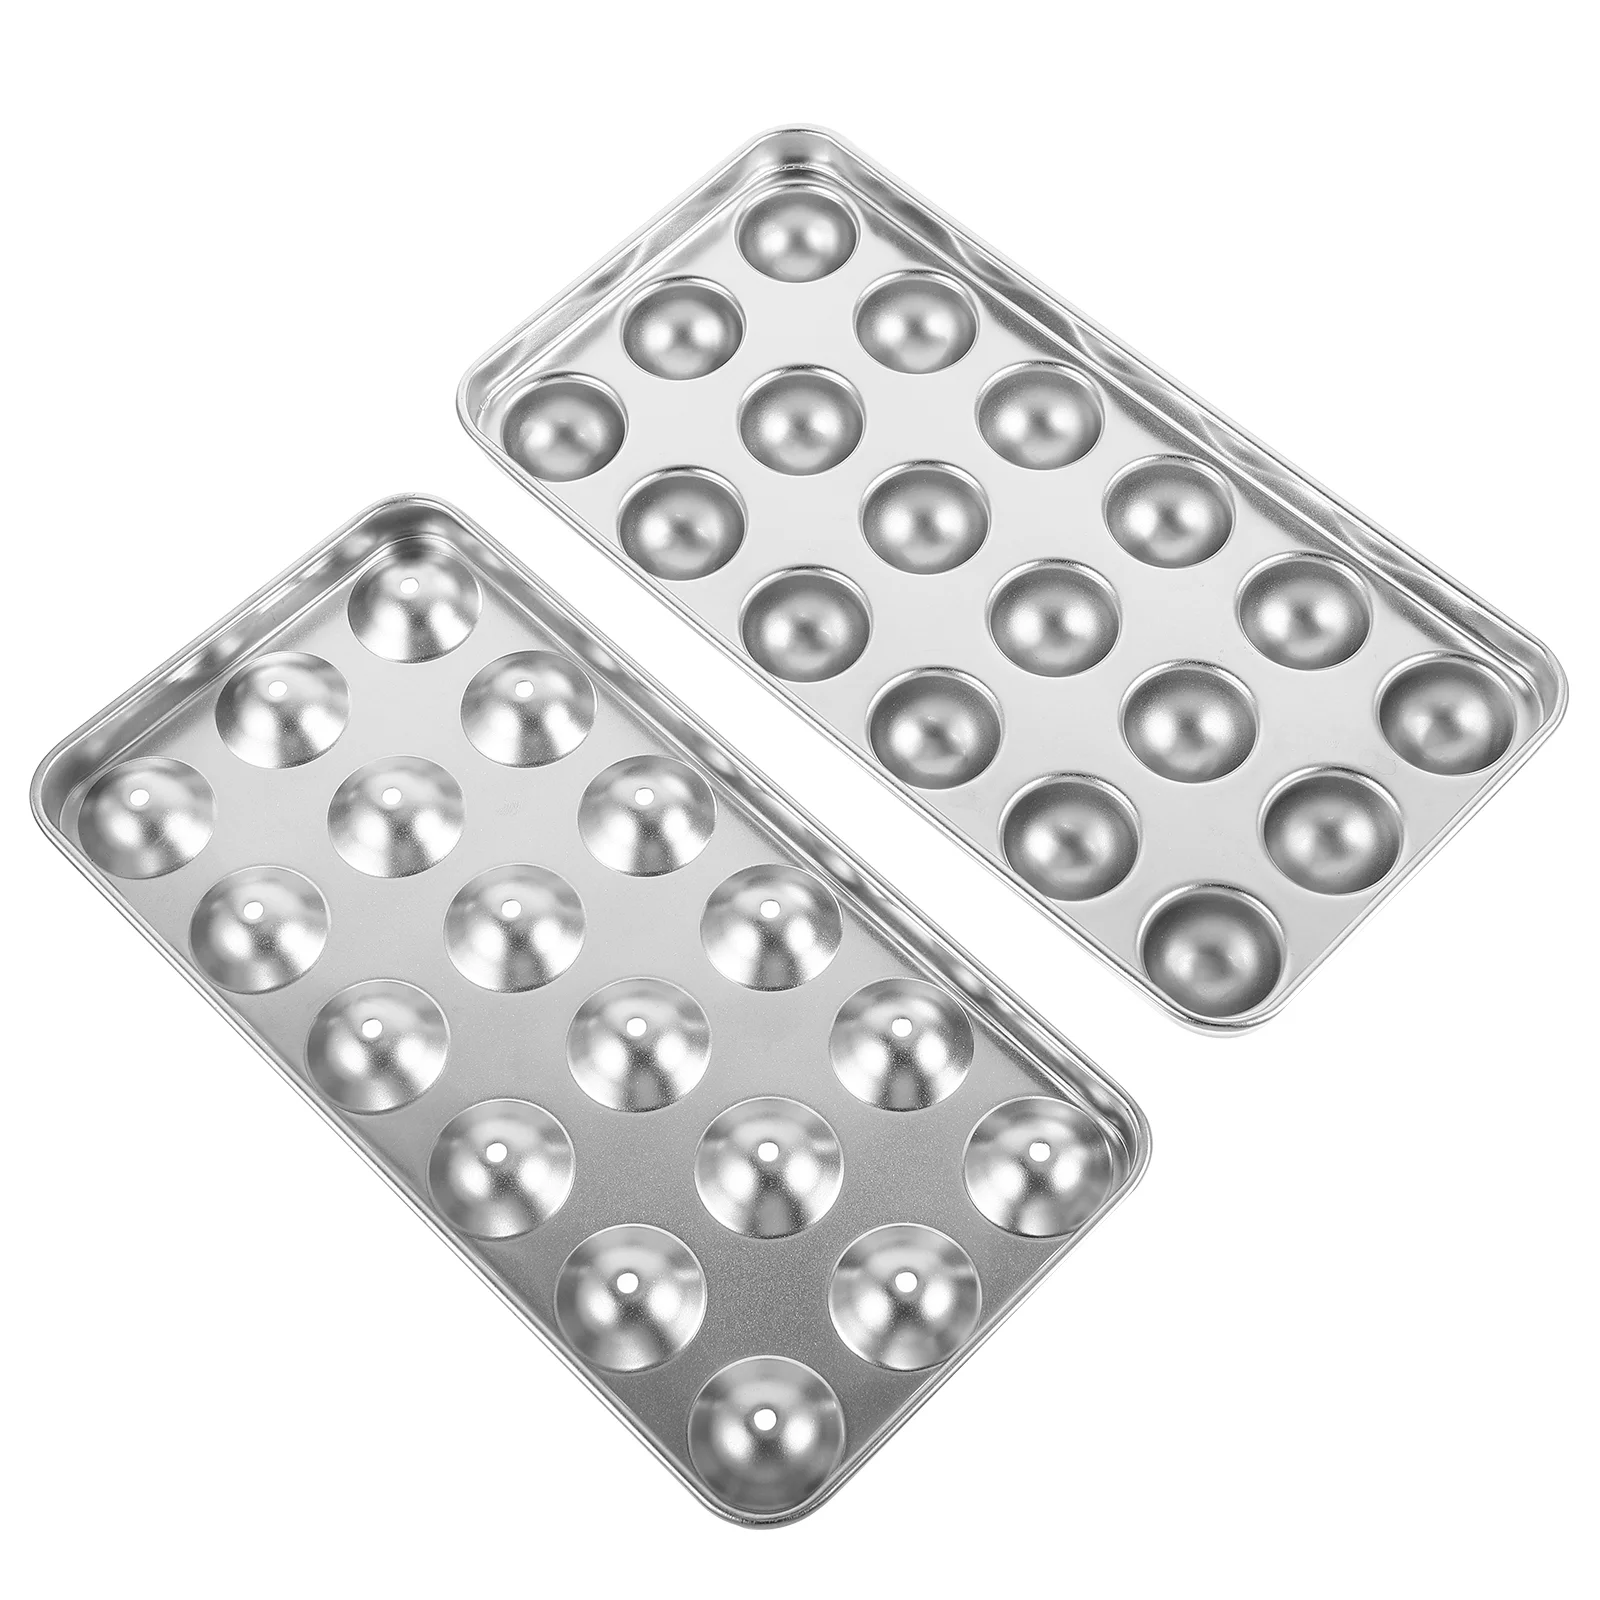 

Cube Tray Stainless Steel Making Mold With Lids Round Resuable Tray Cube Mold Maker Free for Drinks Cocktails